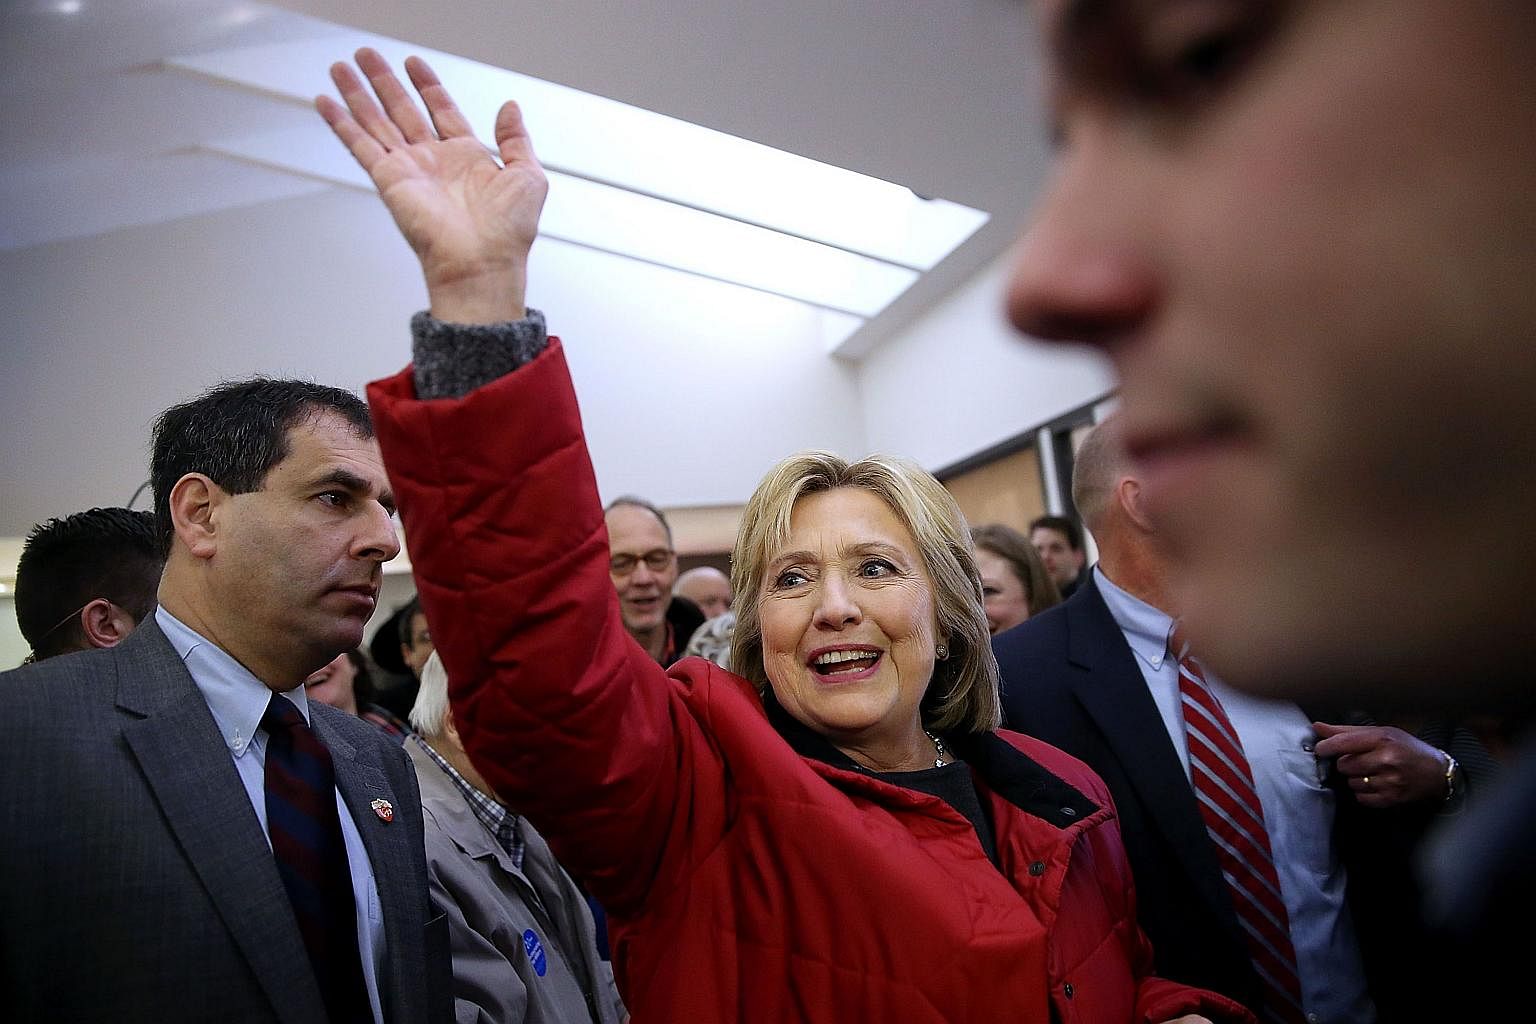 Democratic presidential candidate Hillary Clinton waves to supporters in Des Moines, Iowa.